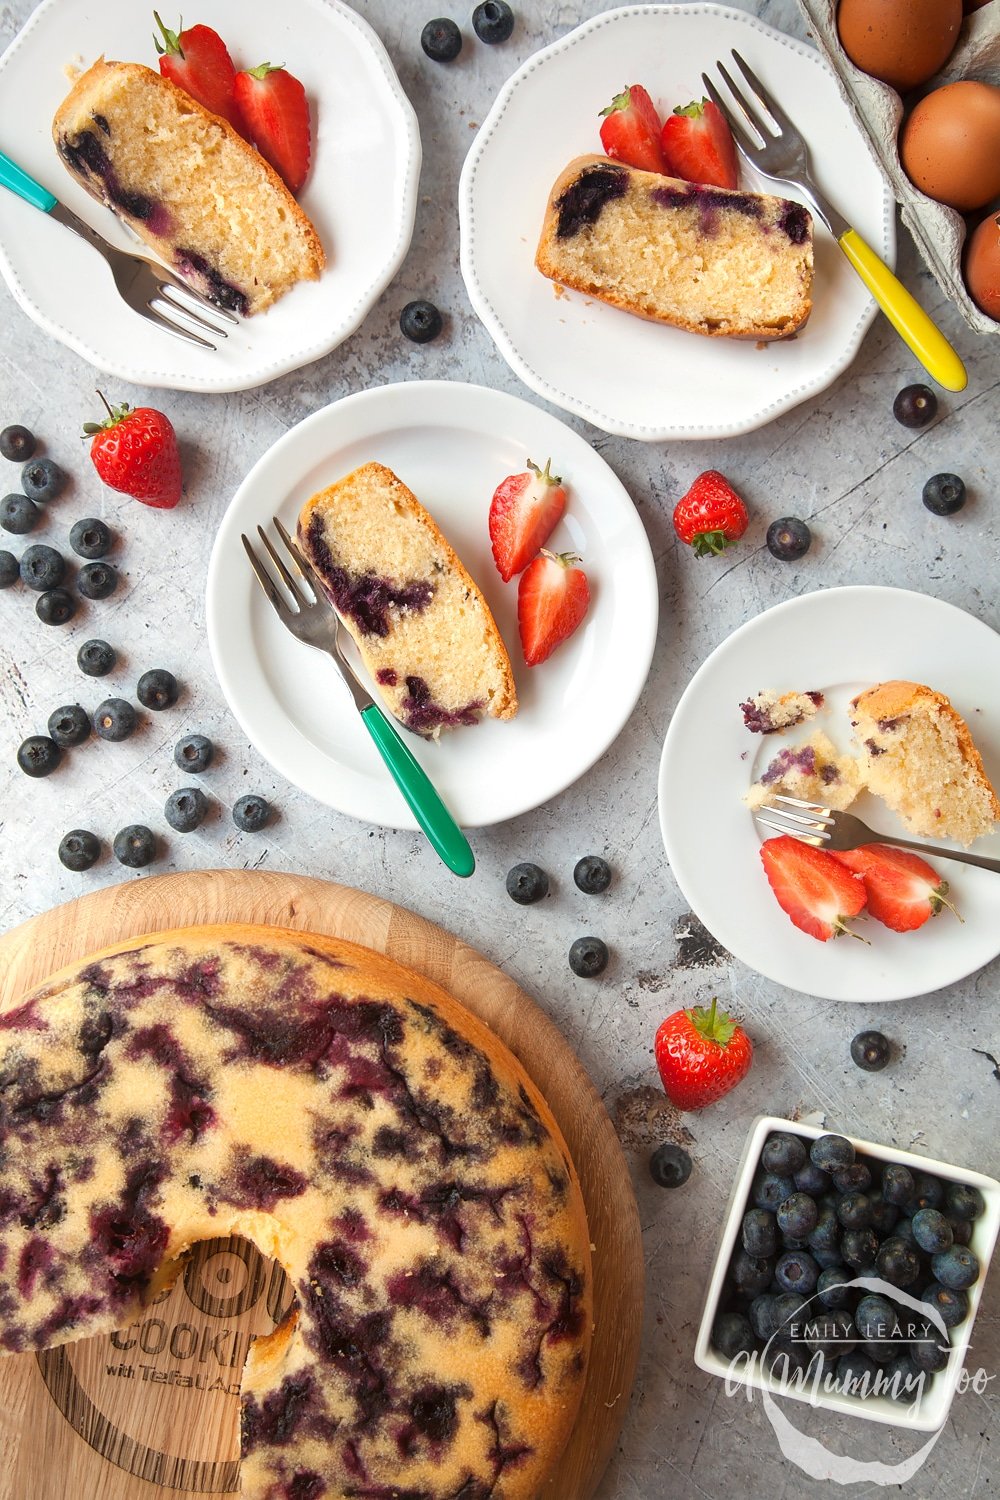 Blueberry cake, baked in the Actifry, shown sliced and served on plates 